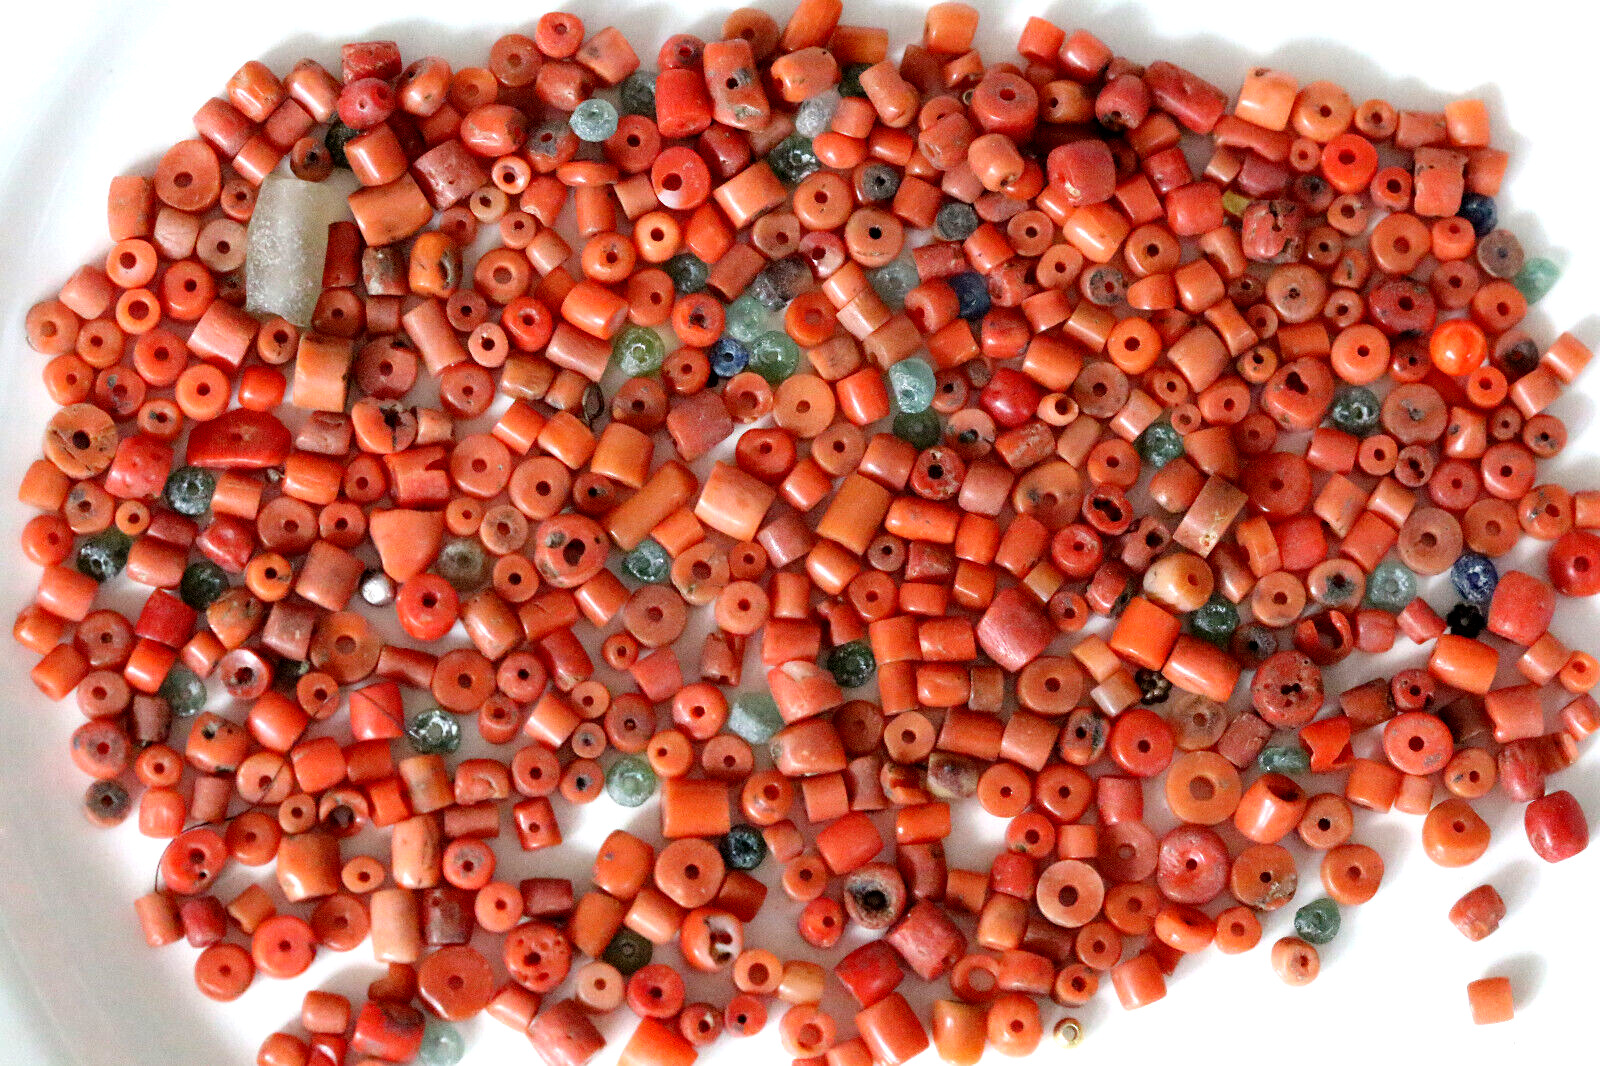 Genuine Antique Red Coral Beads Making Jewelry-48 Grams. Average beads size 4 mm